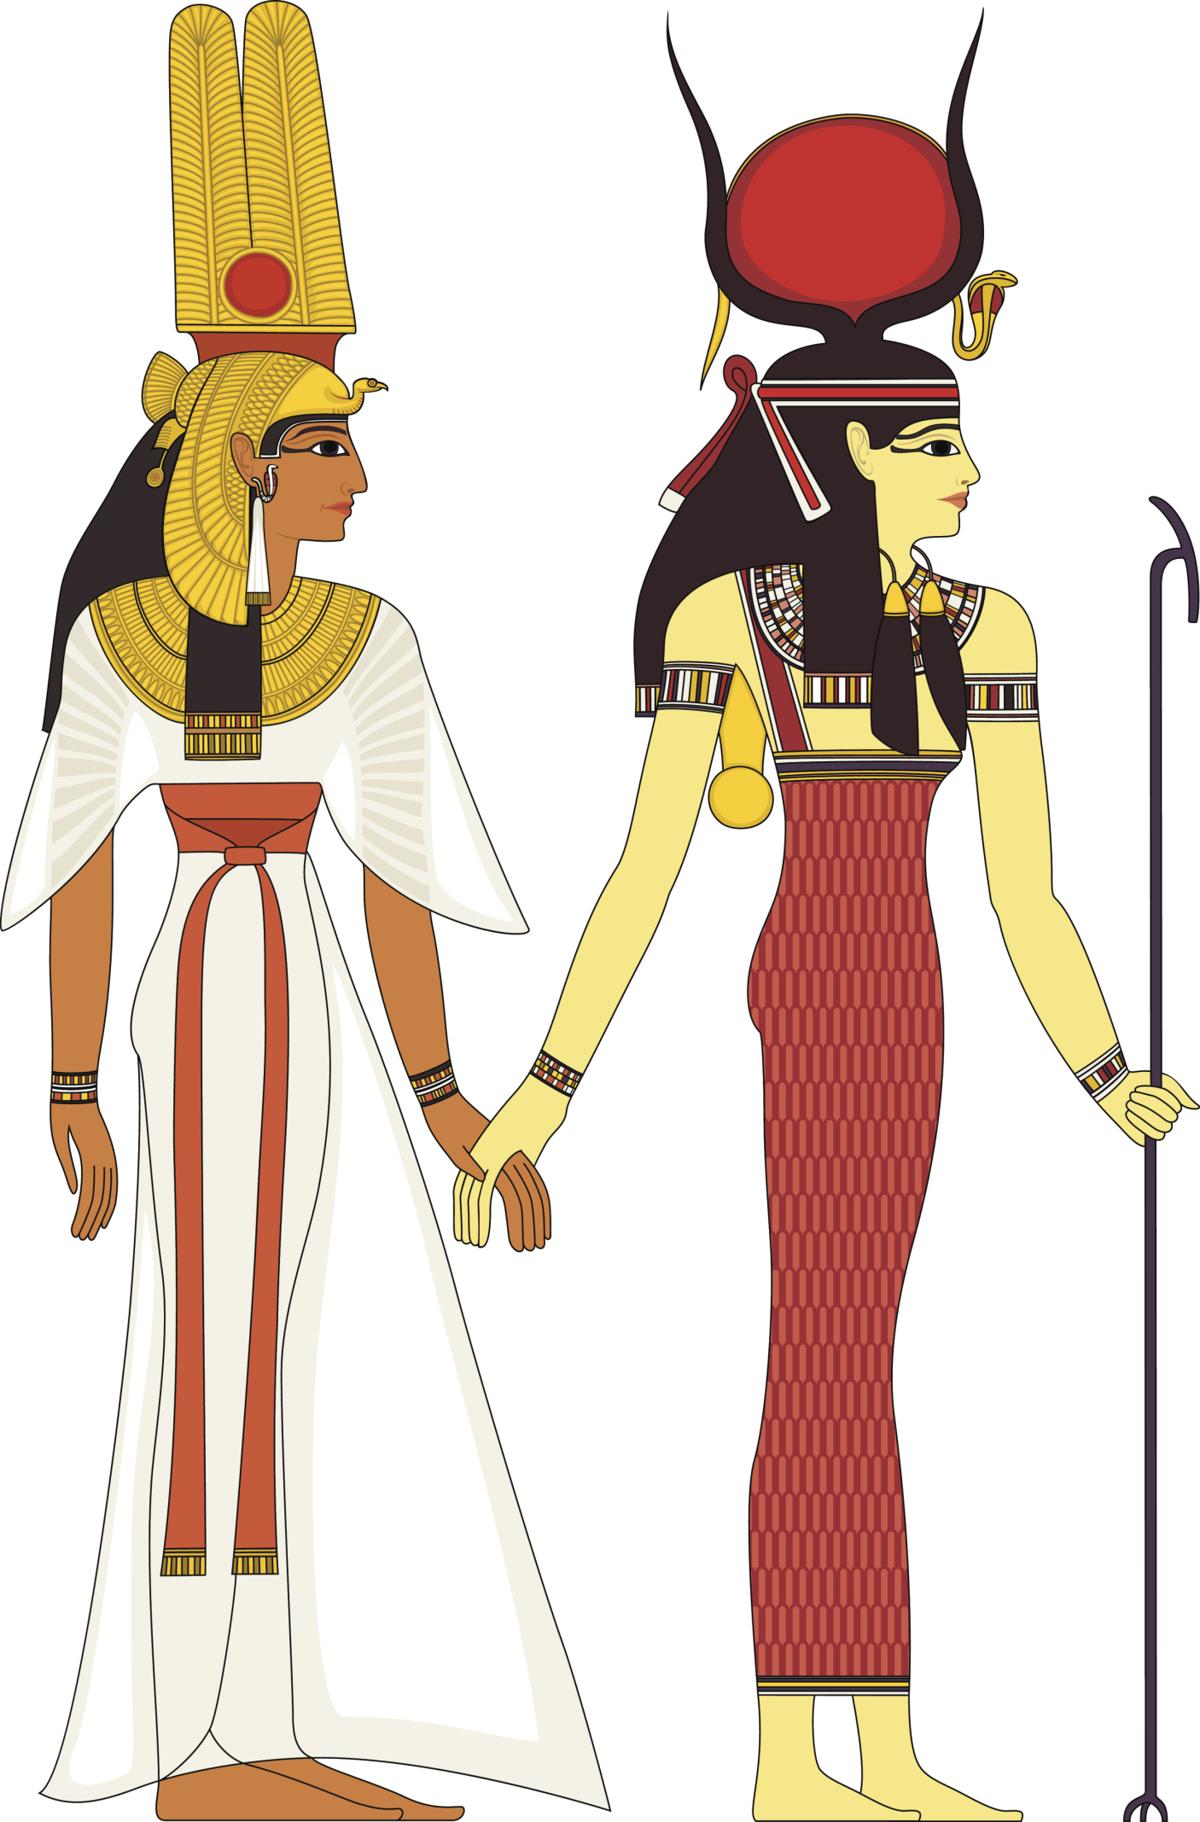 egyptian clipart country egypt